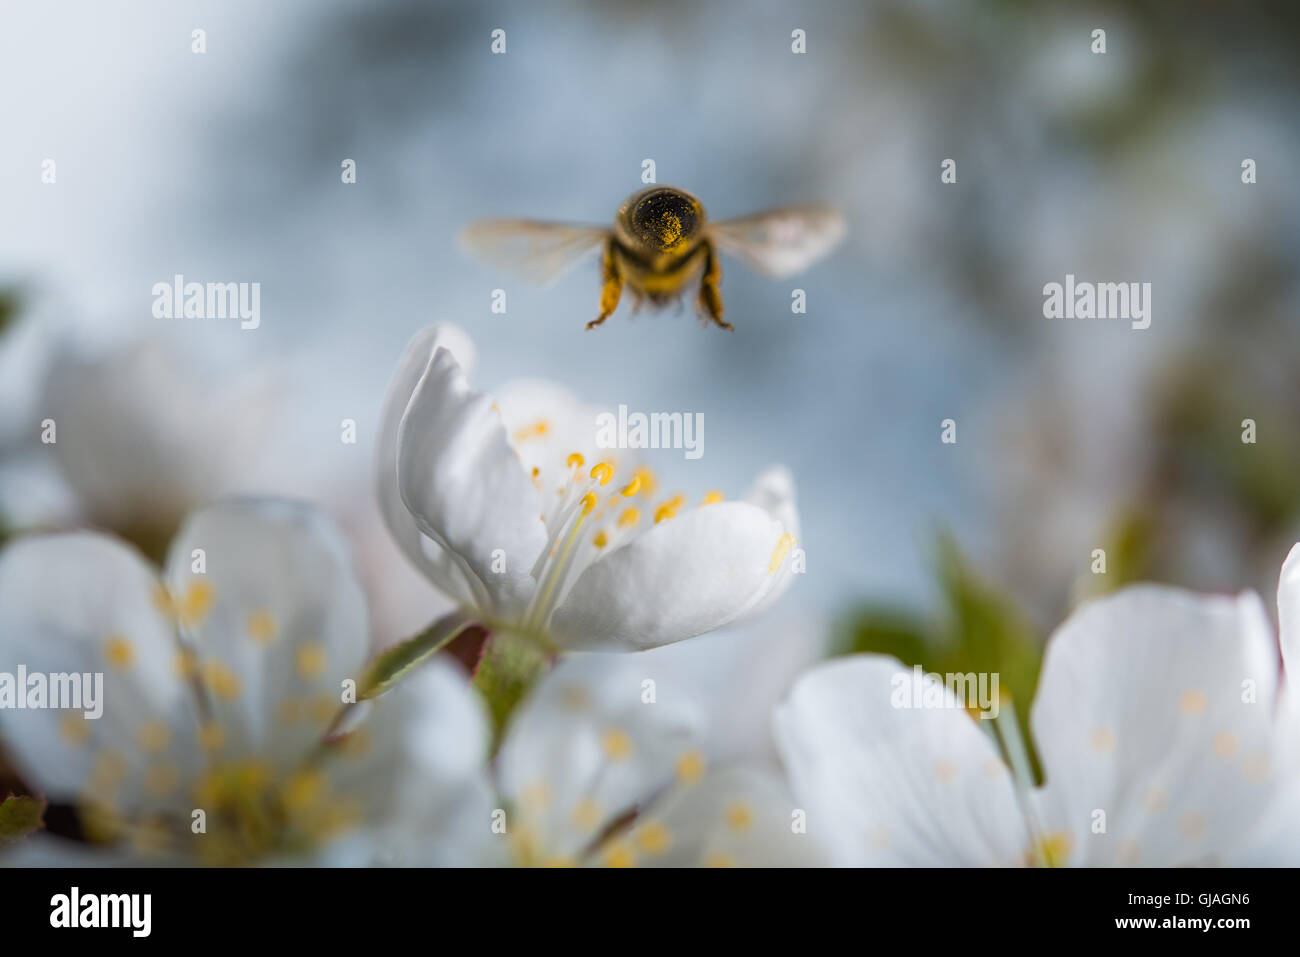 Honey bee collecting pollen from flowers. Stock Photo